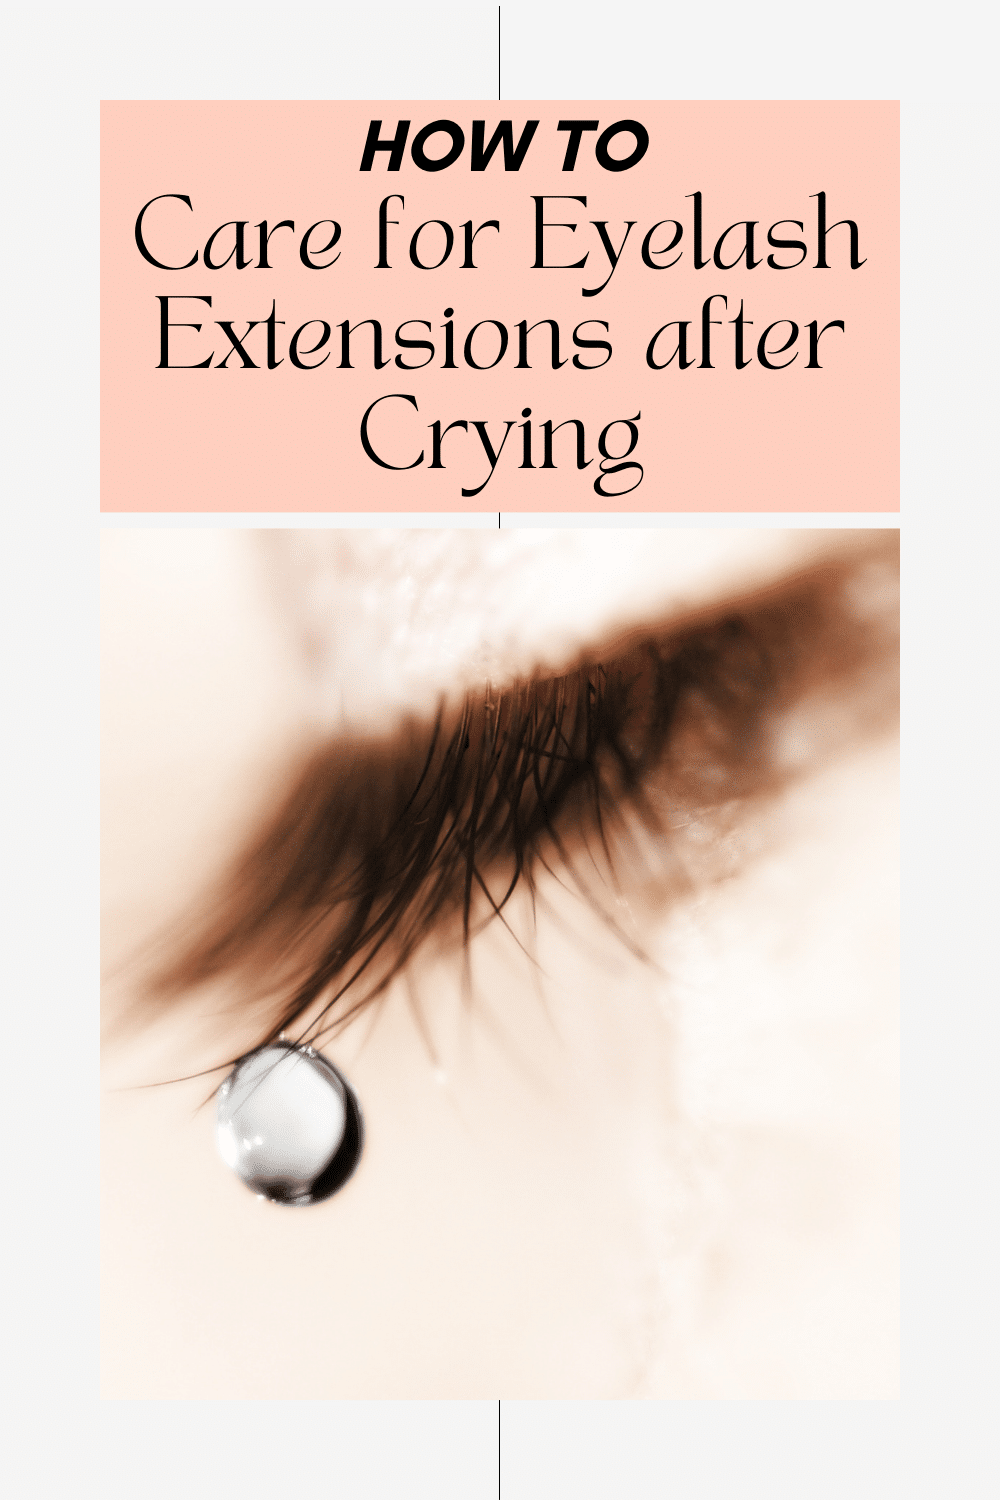 HOW TO care for eyelash extensions after crying